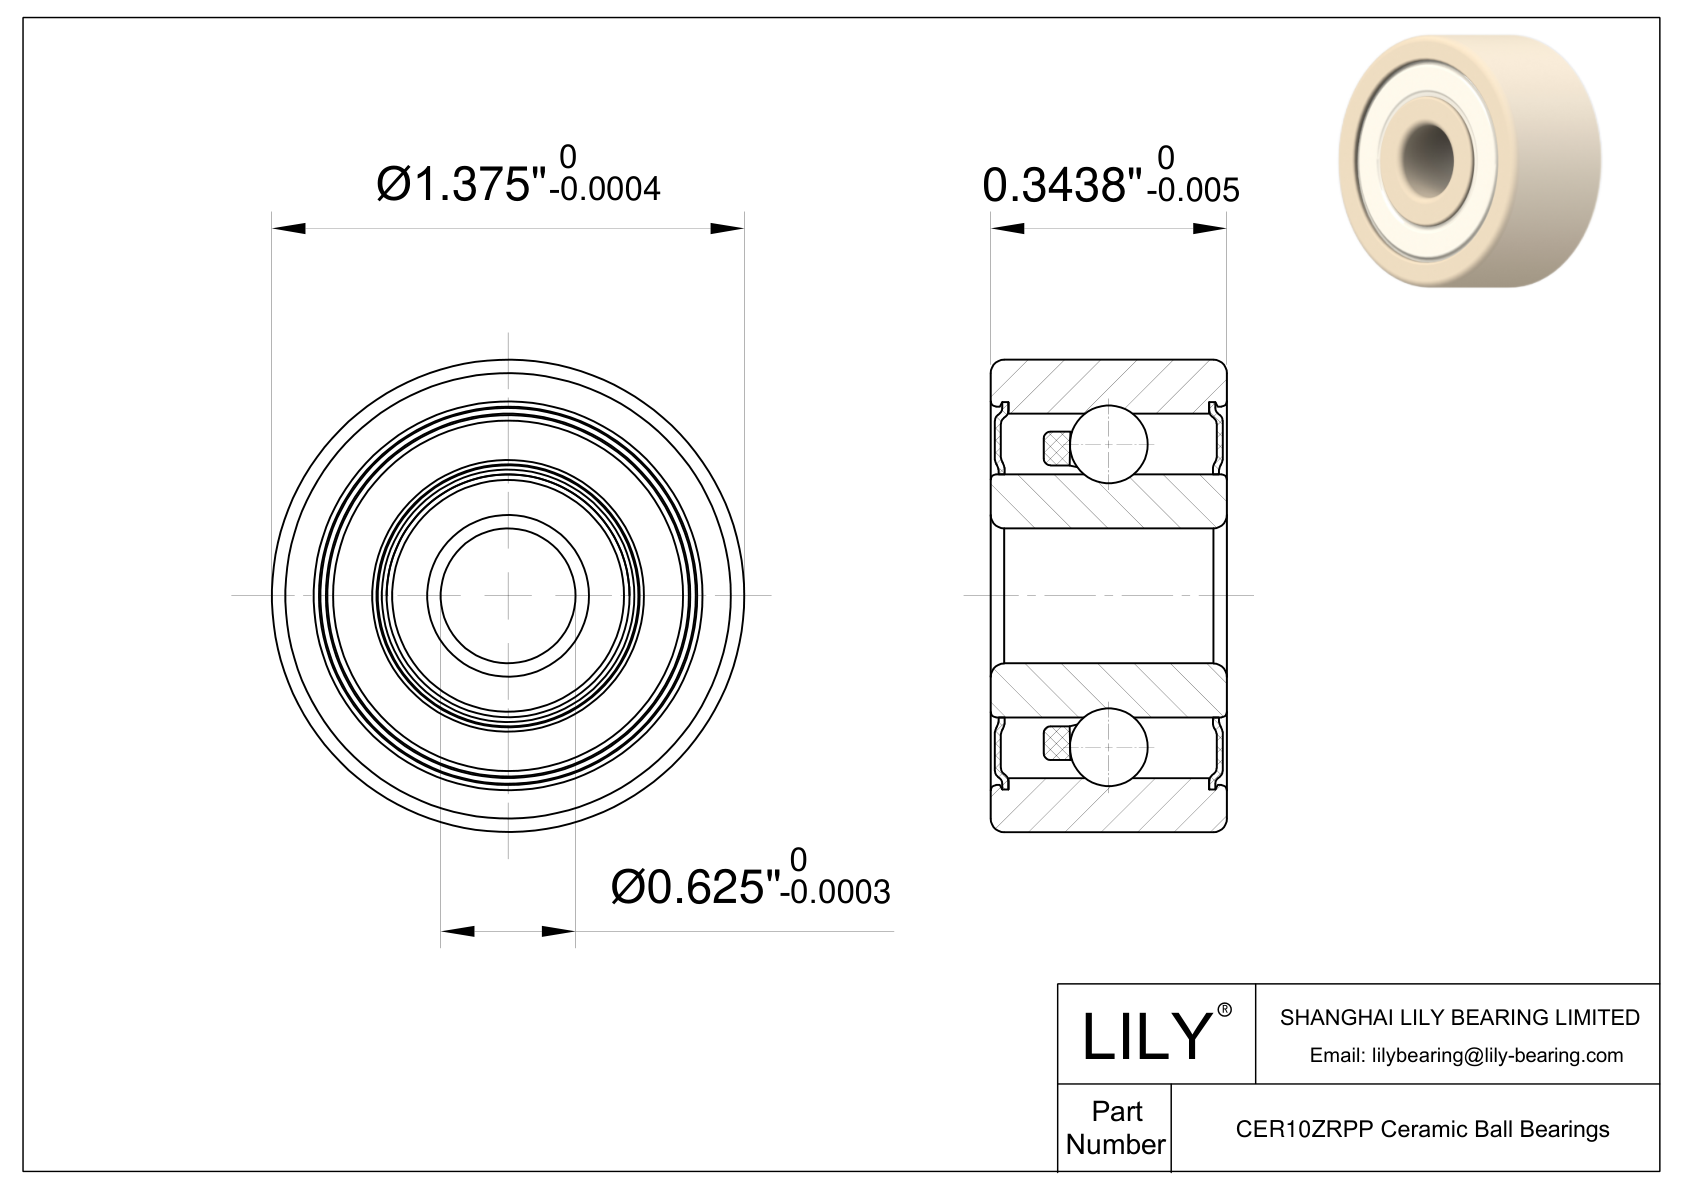 CEZR R10 2RS Inch Size Zirconia Ceramic Bearings cad drawing